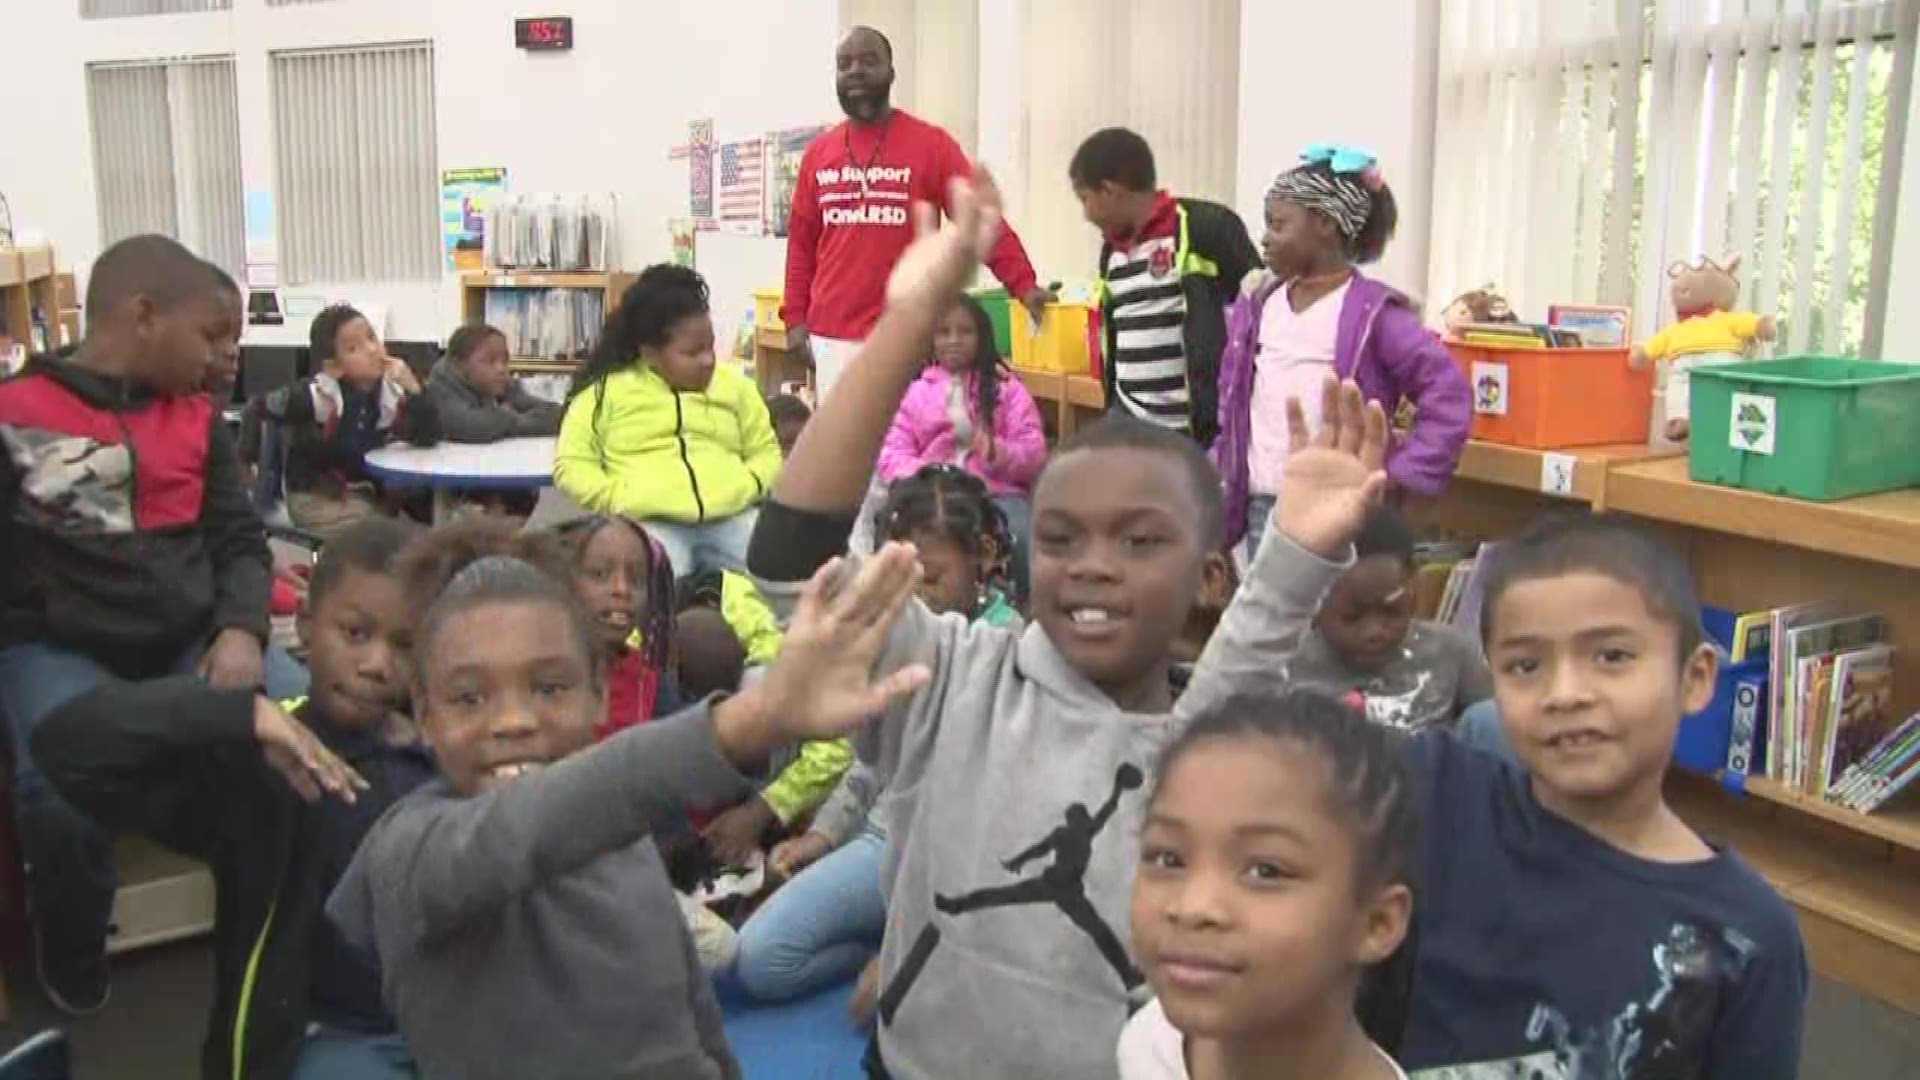 Project Success kicked off at Stephens Elementary in Little Rock.